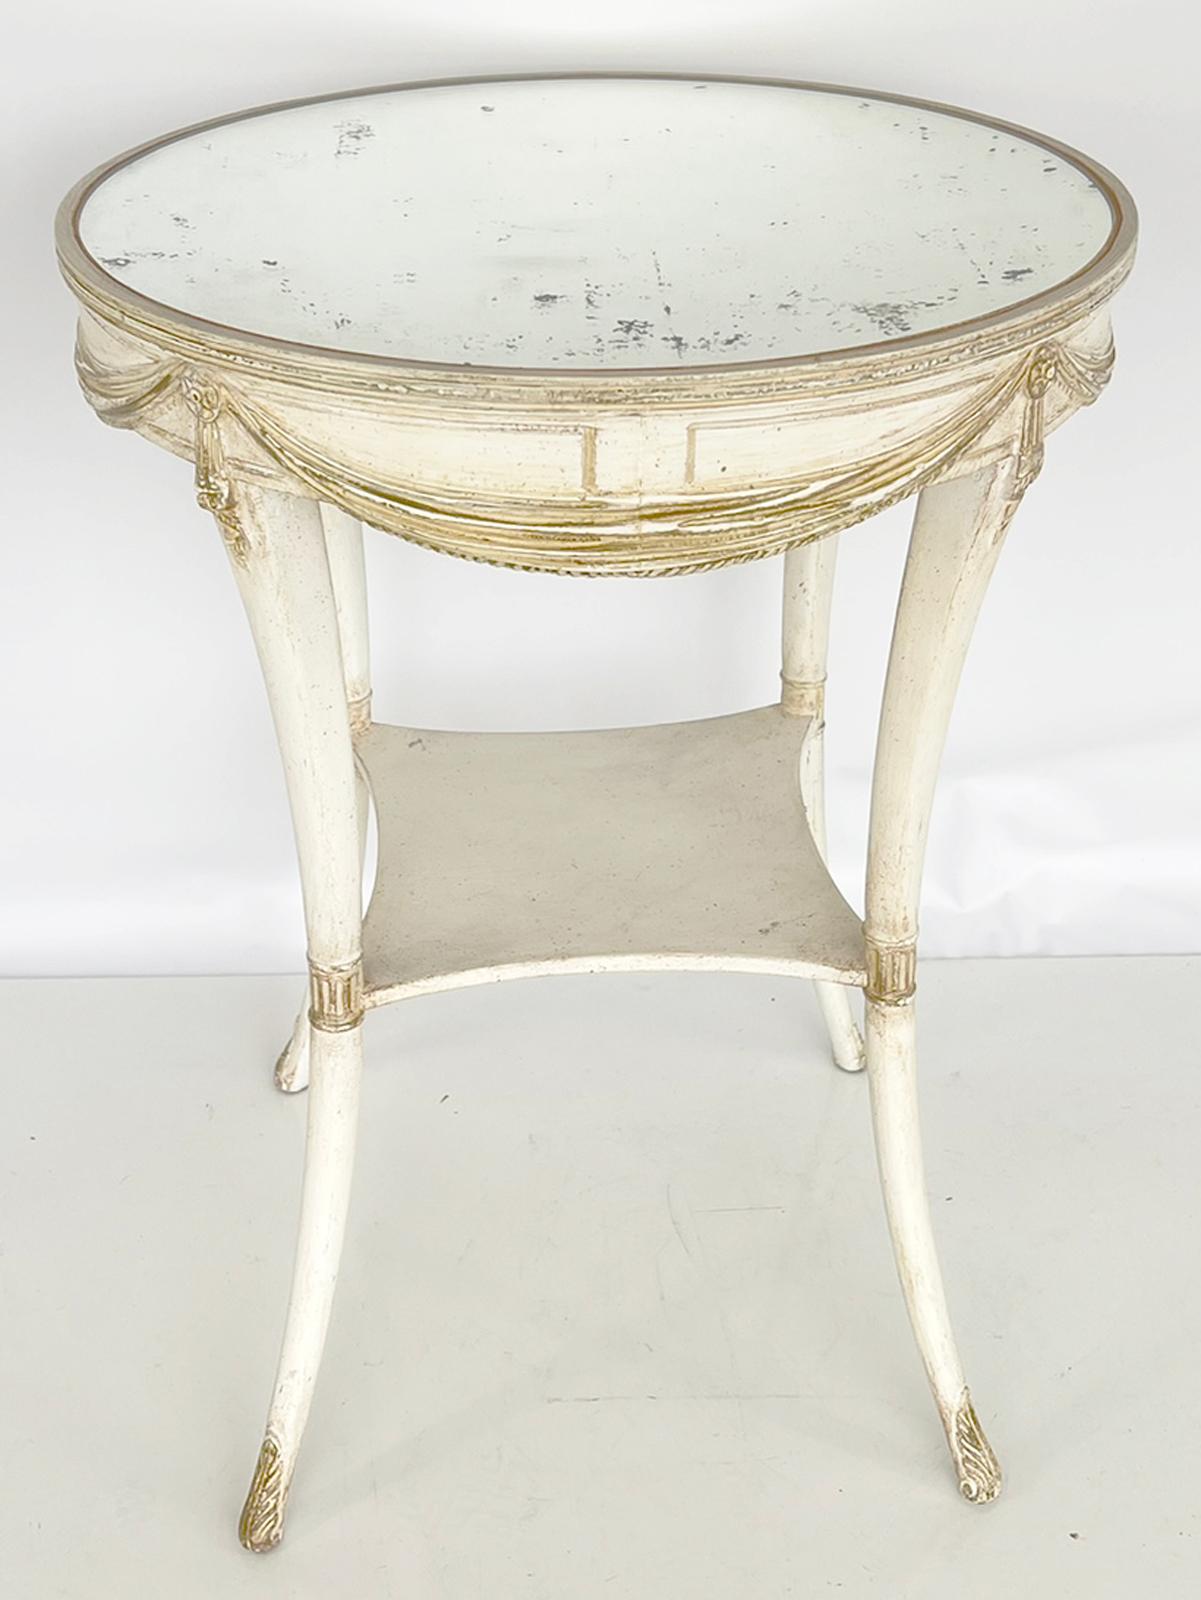 Mid-20th Century Swag-carved, Painted, Round Occasional Table with Mirrored Top by Grosfeld House For Sale